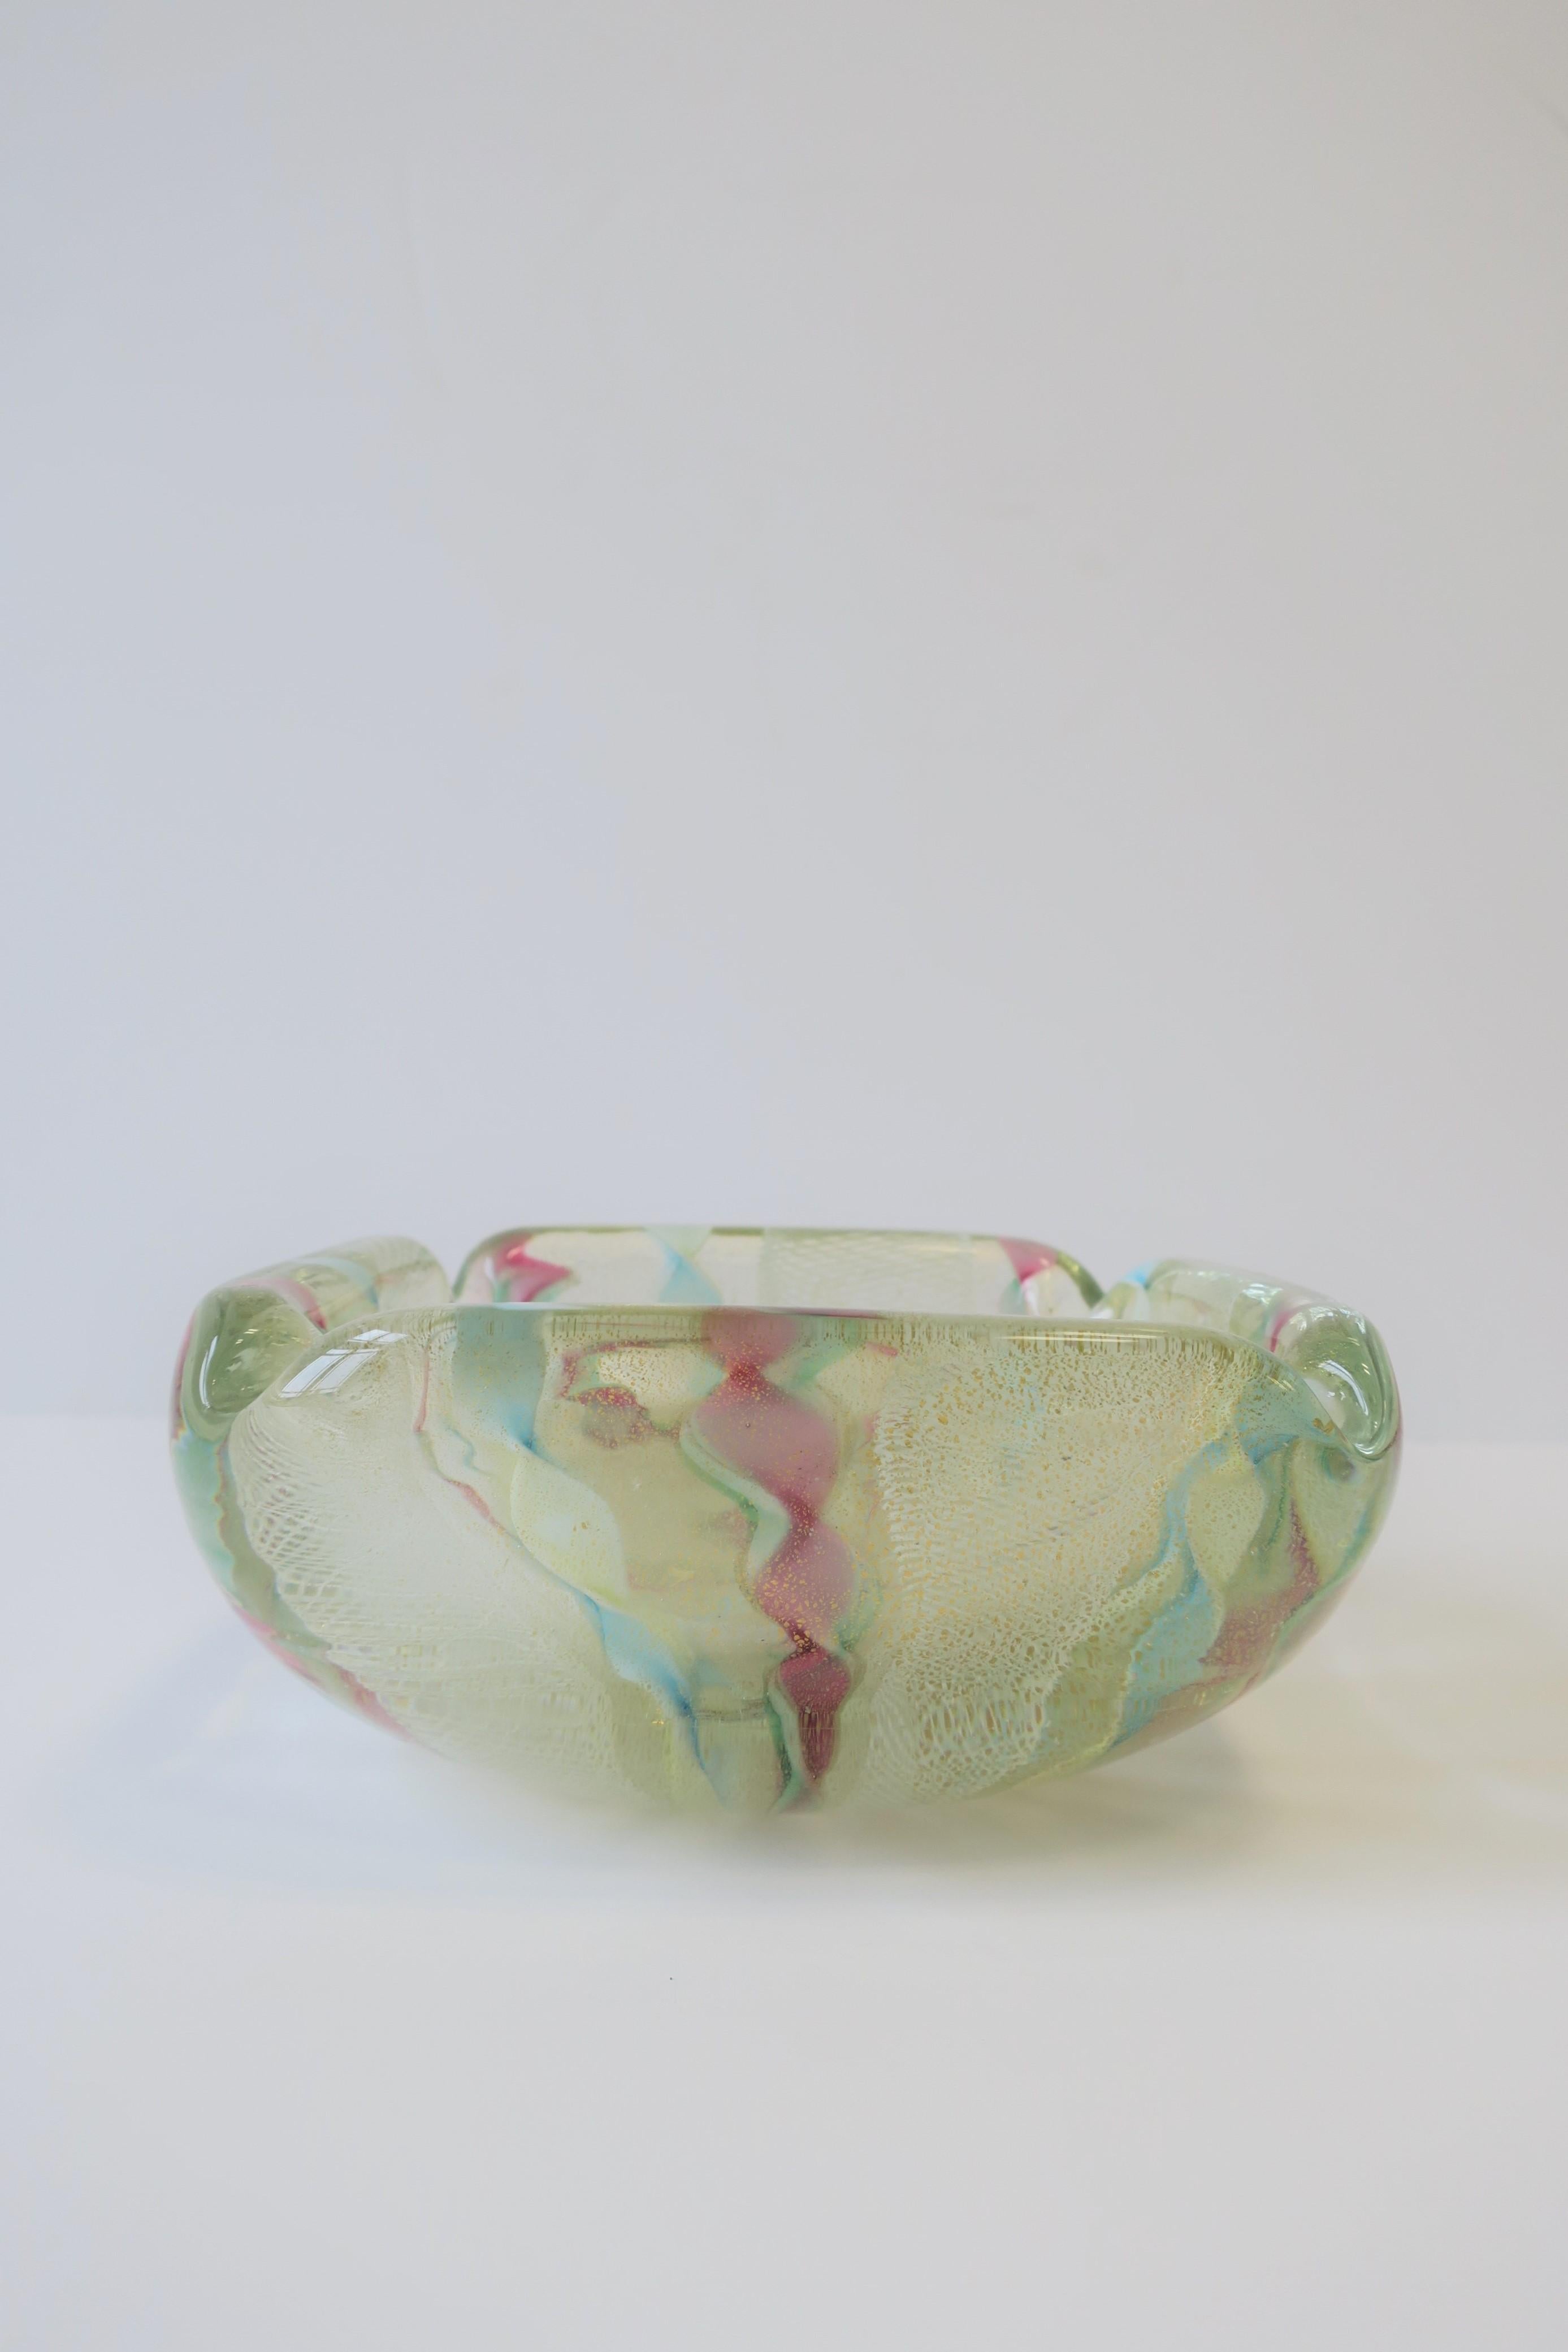 20th Century Italian Murano Pink Blue White & Gold Art Glass Bowl or Ashtray Fratelli Toso For Sale